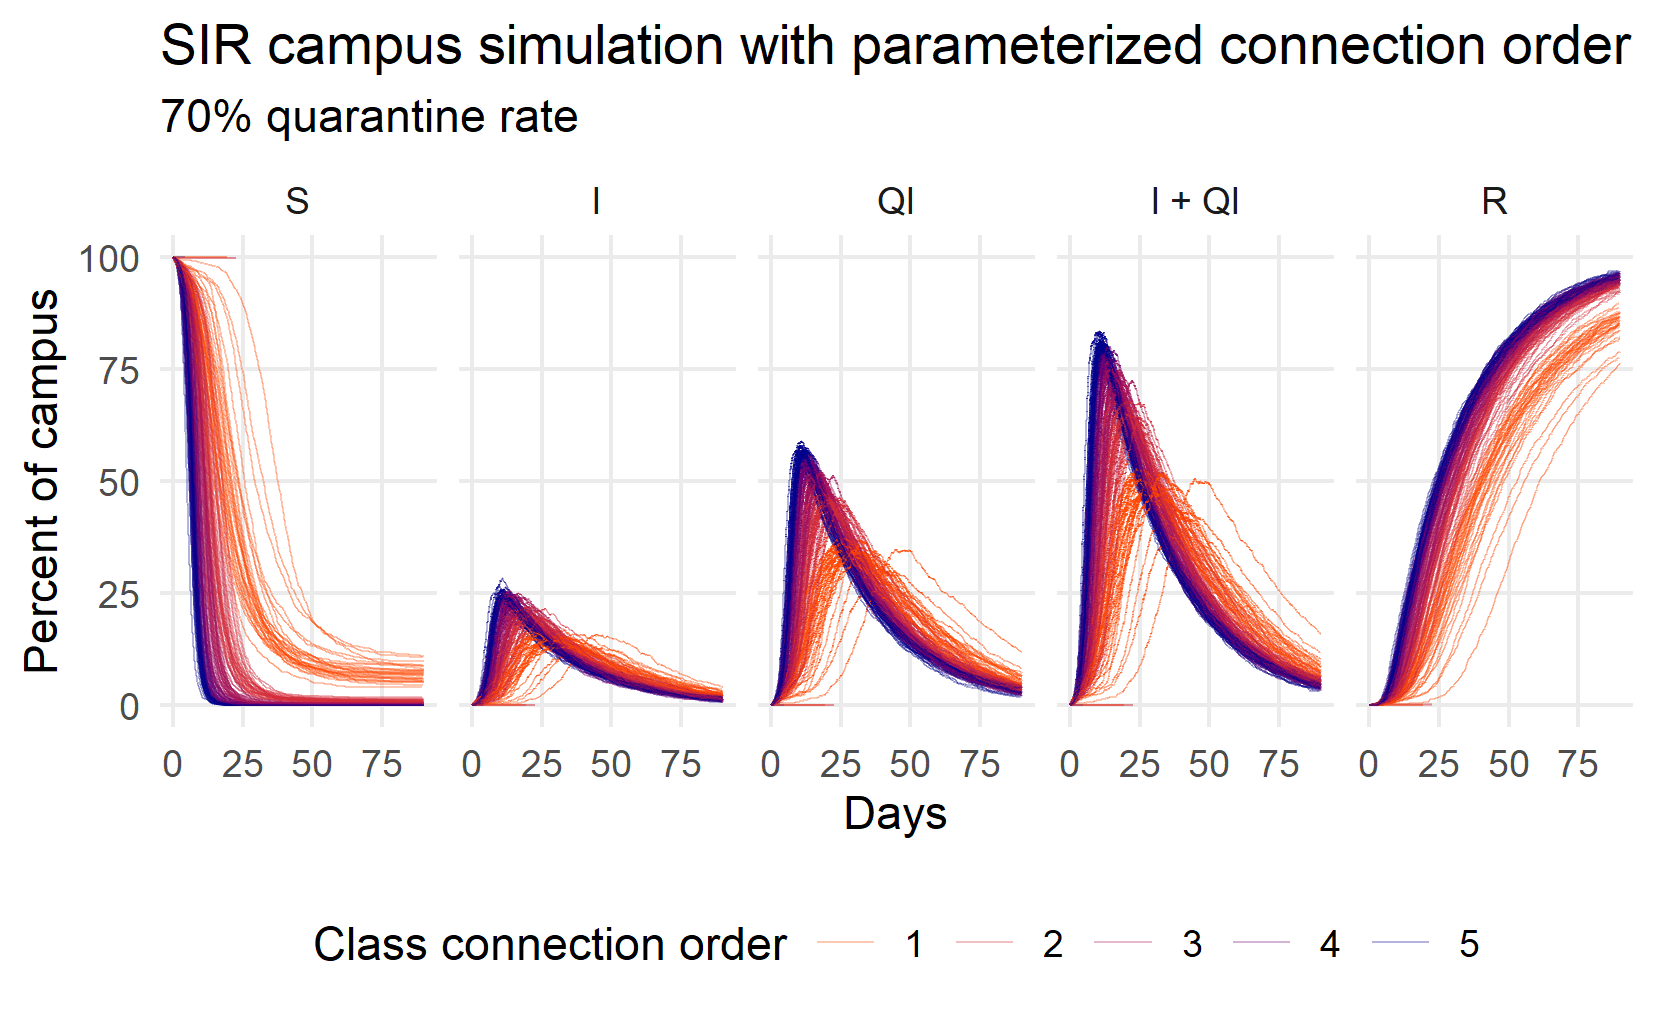 Simulating Susceptible (S), Infected but not qurantined (I), Quarantined (Q), all infected (Q+I), and Recovered (R) individuals while varying the class connection order